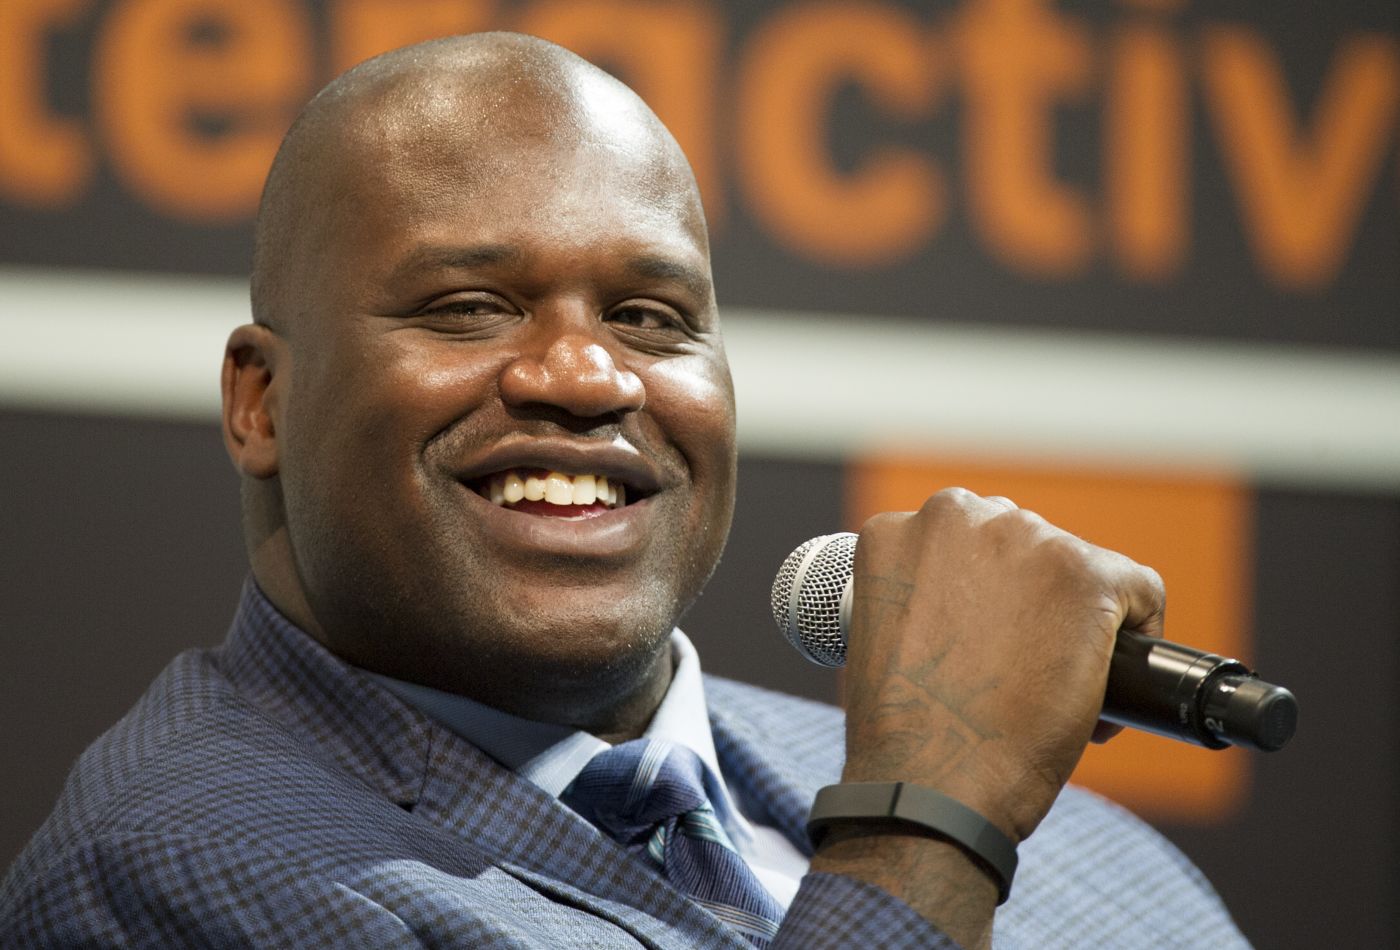 Shaquille O’Neil Net Worth In 2019 And How Much He Makes Yearly